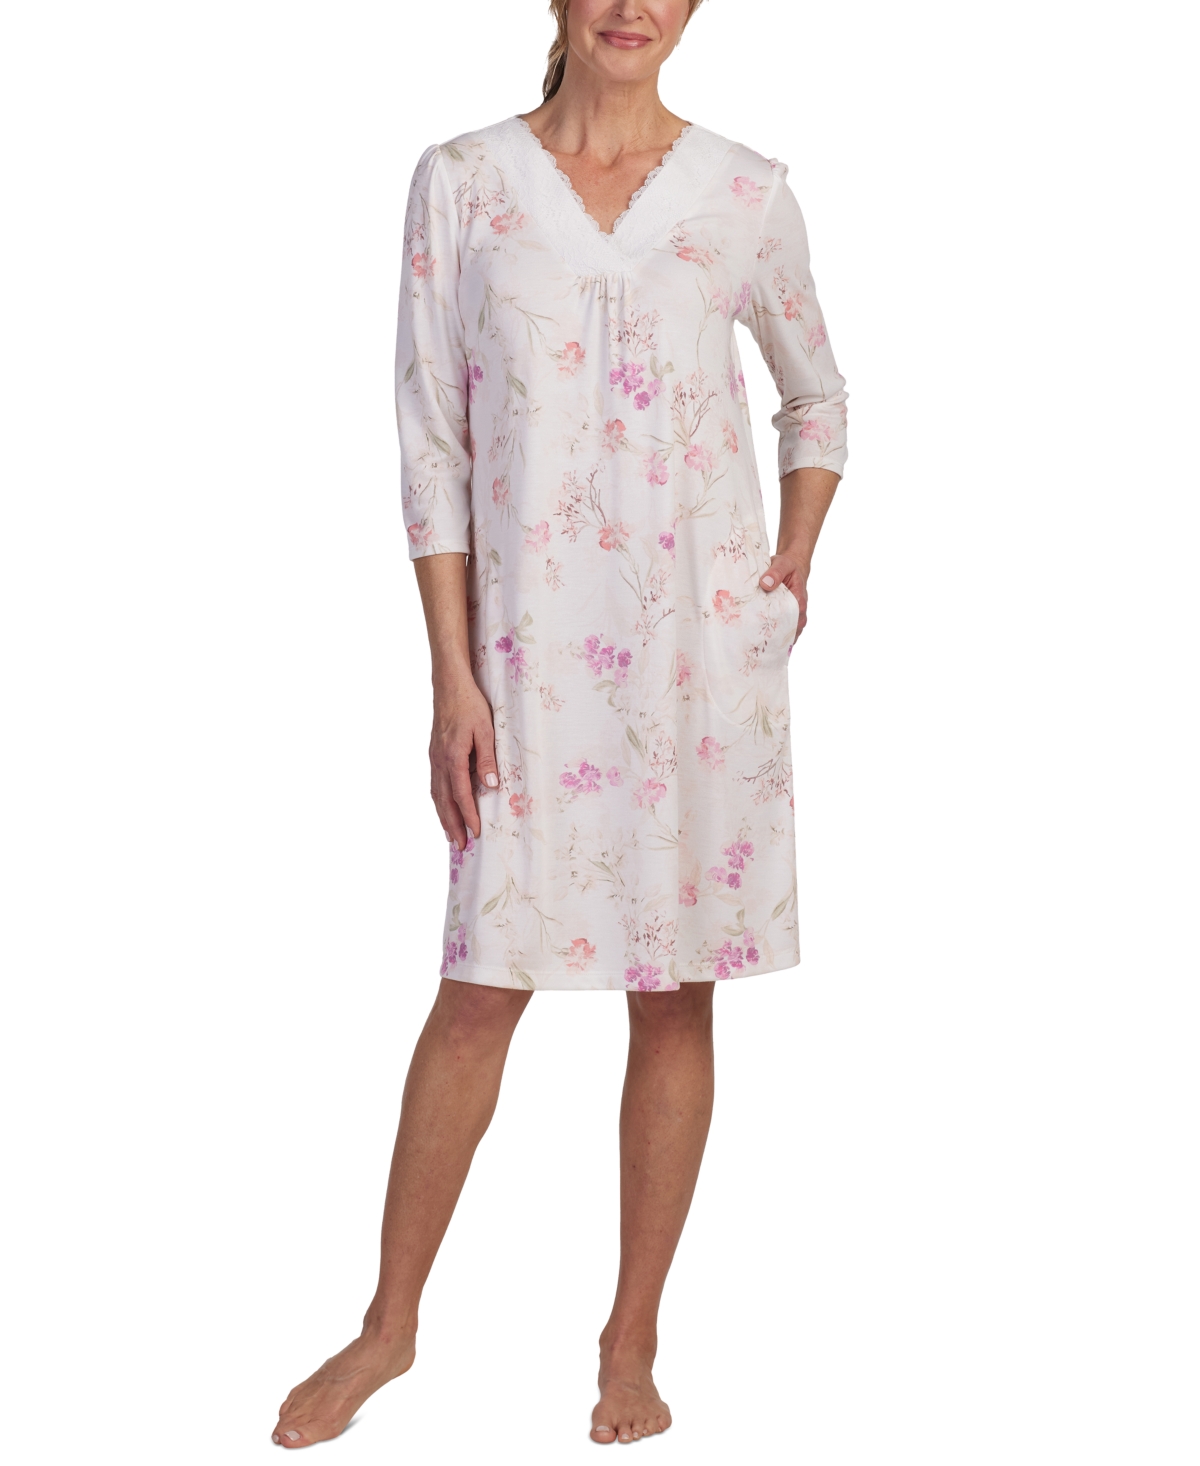 Women's Floral Lace-Trim Nightgown - Pink Orchid